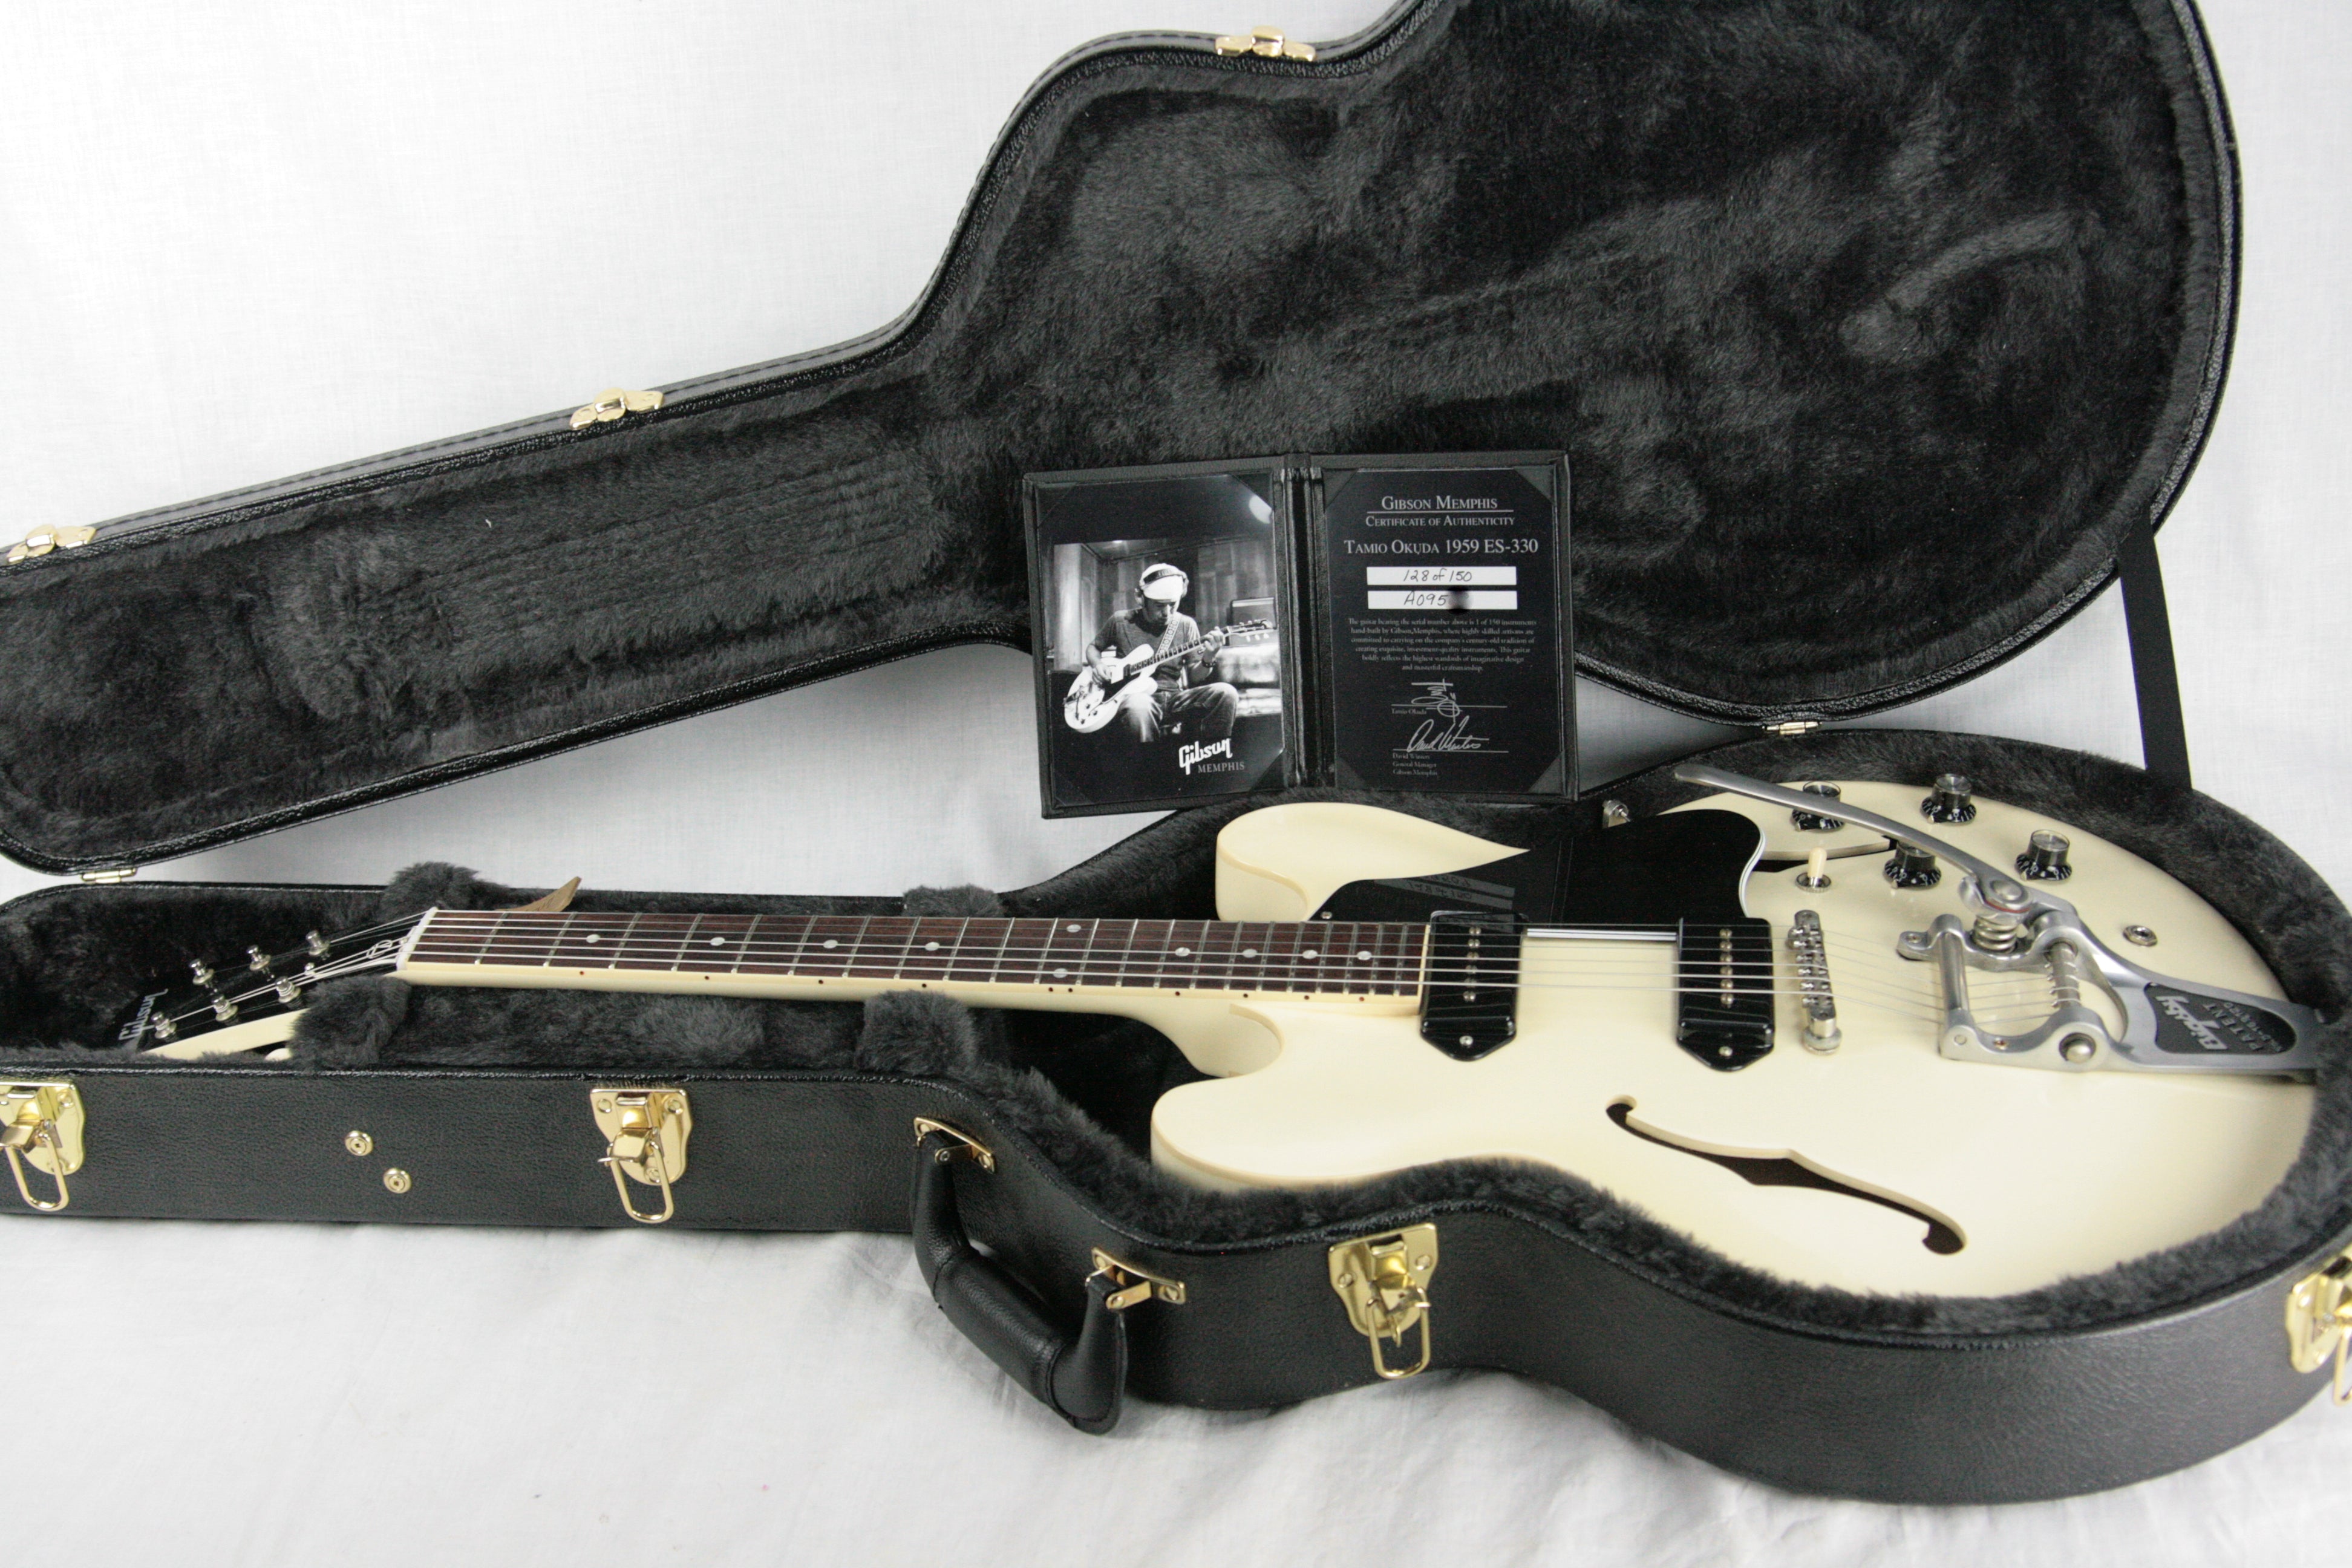 *SOLD*  1959 Gibson Memphis ES-330 Tamio Okuda Classic White! P90 Bigsby Limited Edition